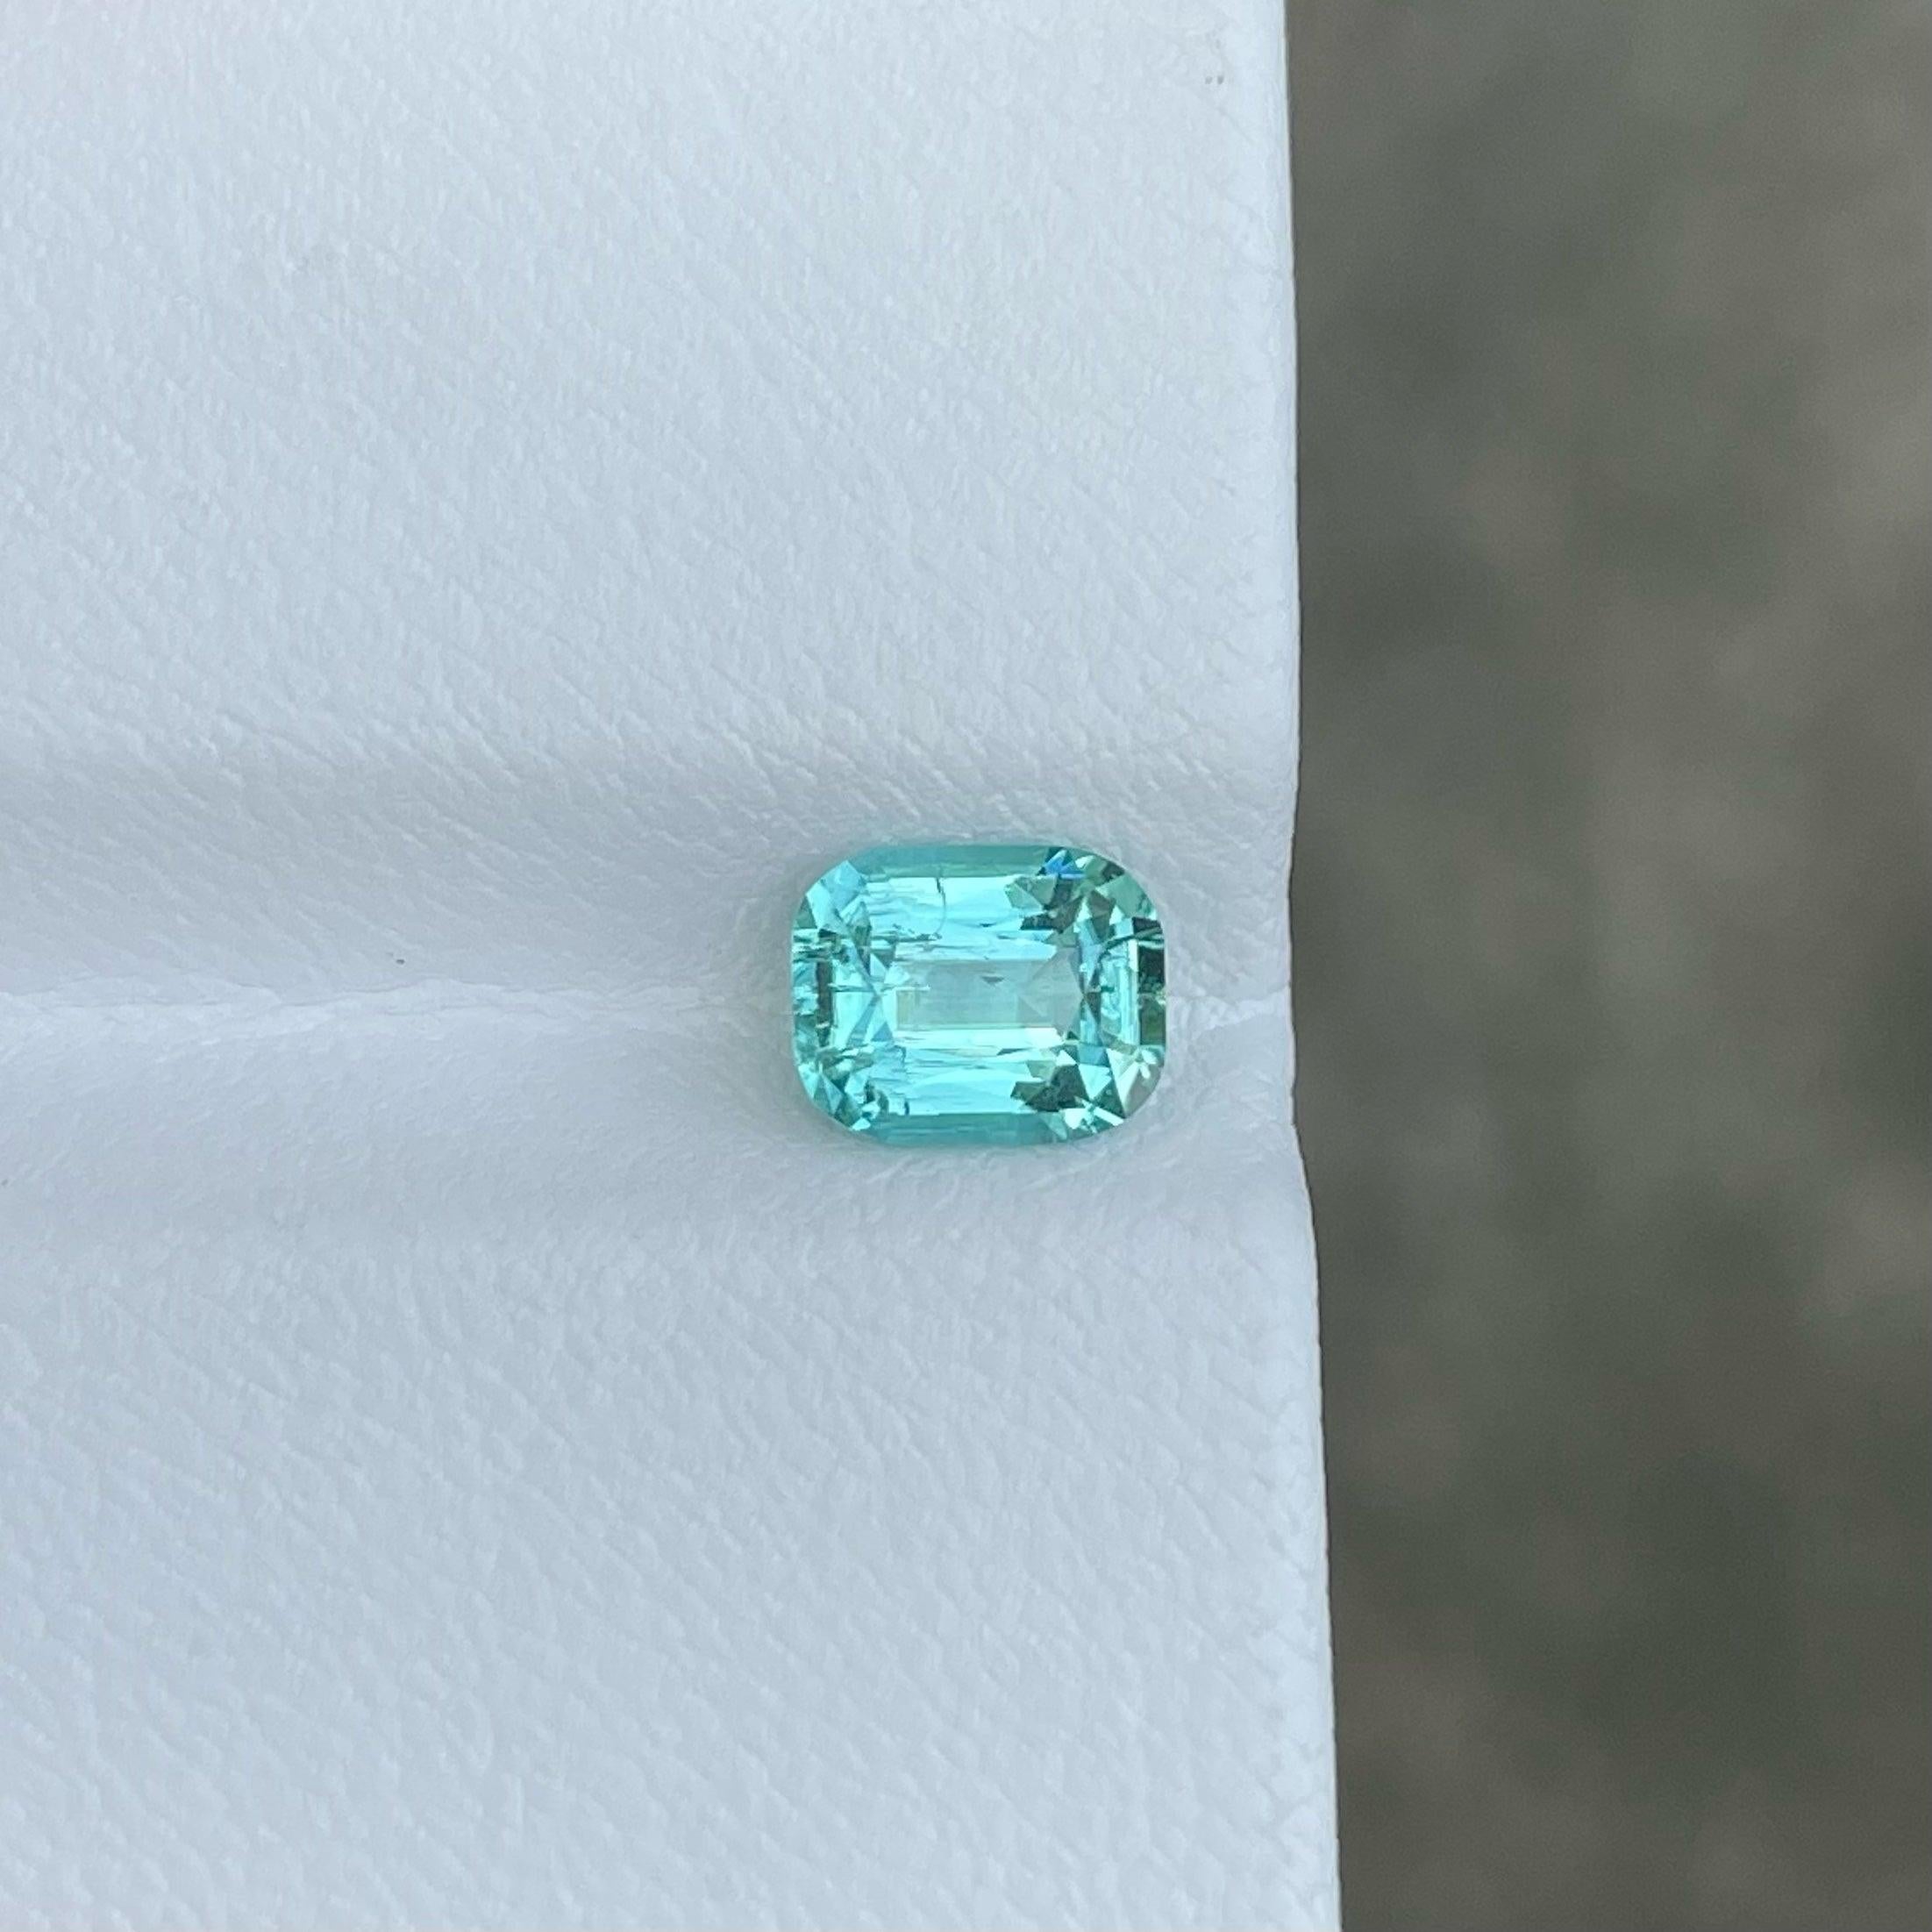 Turquoise Blue Natural Tourmaline From Afghanistan of 1.35 carats from Afghanistan has a wonderful cut in a Cushion shape, incredible Blue color. Great brilliance. This gem is totally SI Clarity.

Product Information:
GEMSTONE TYPE:	Turquoise Blue